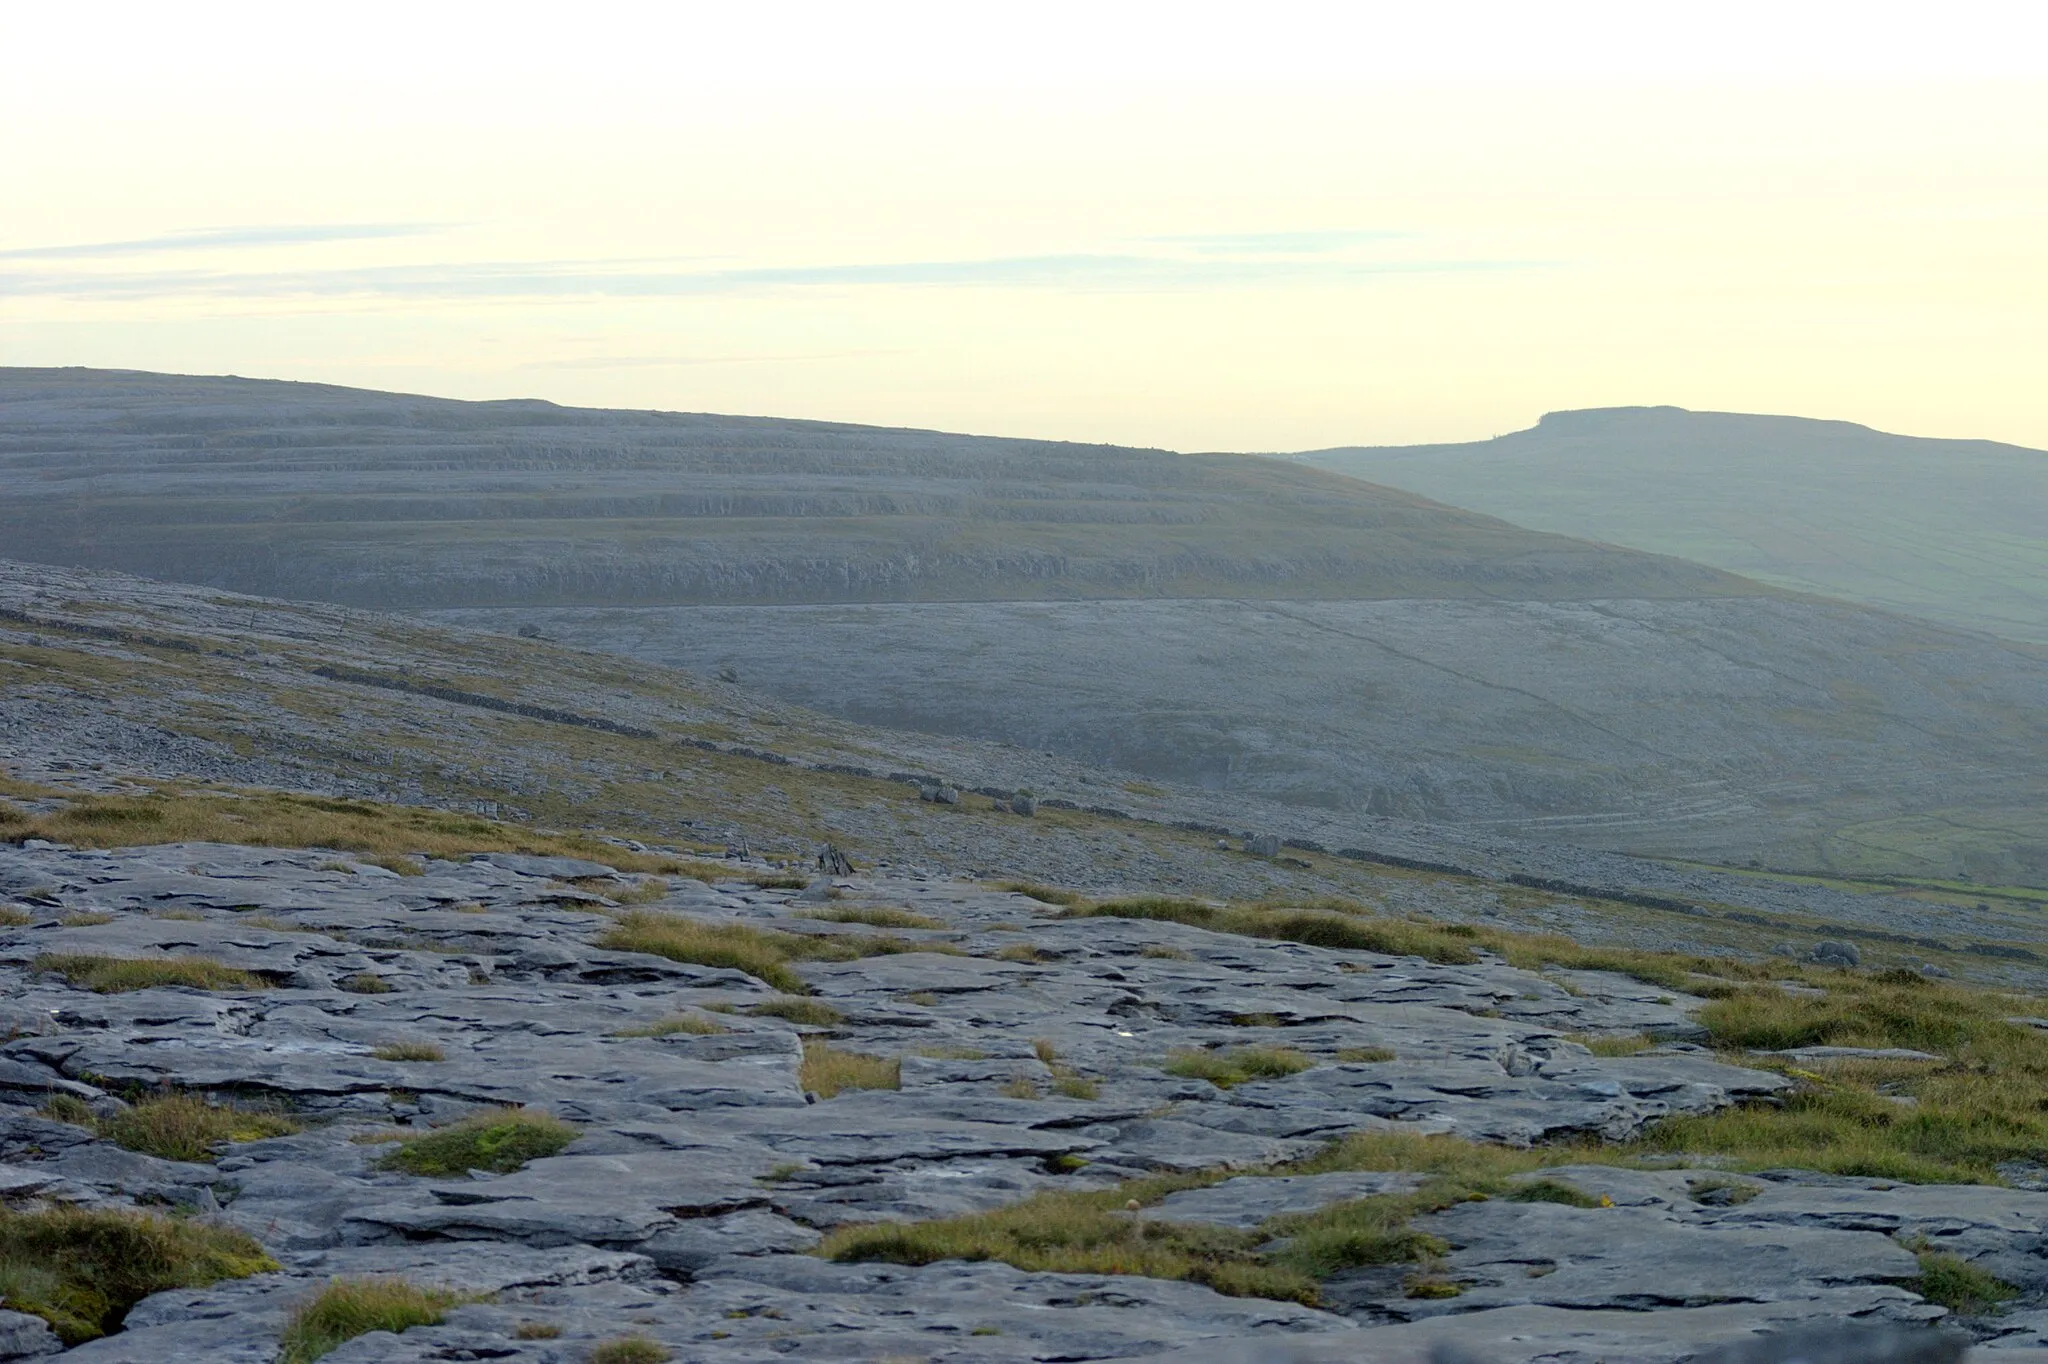 Photo showing: Hilly karst landscape near Black Head on the NW corner of the Burren in County Clare, Ireland. Danny Burke